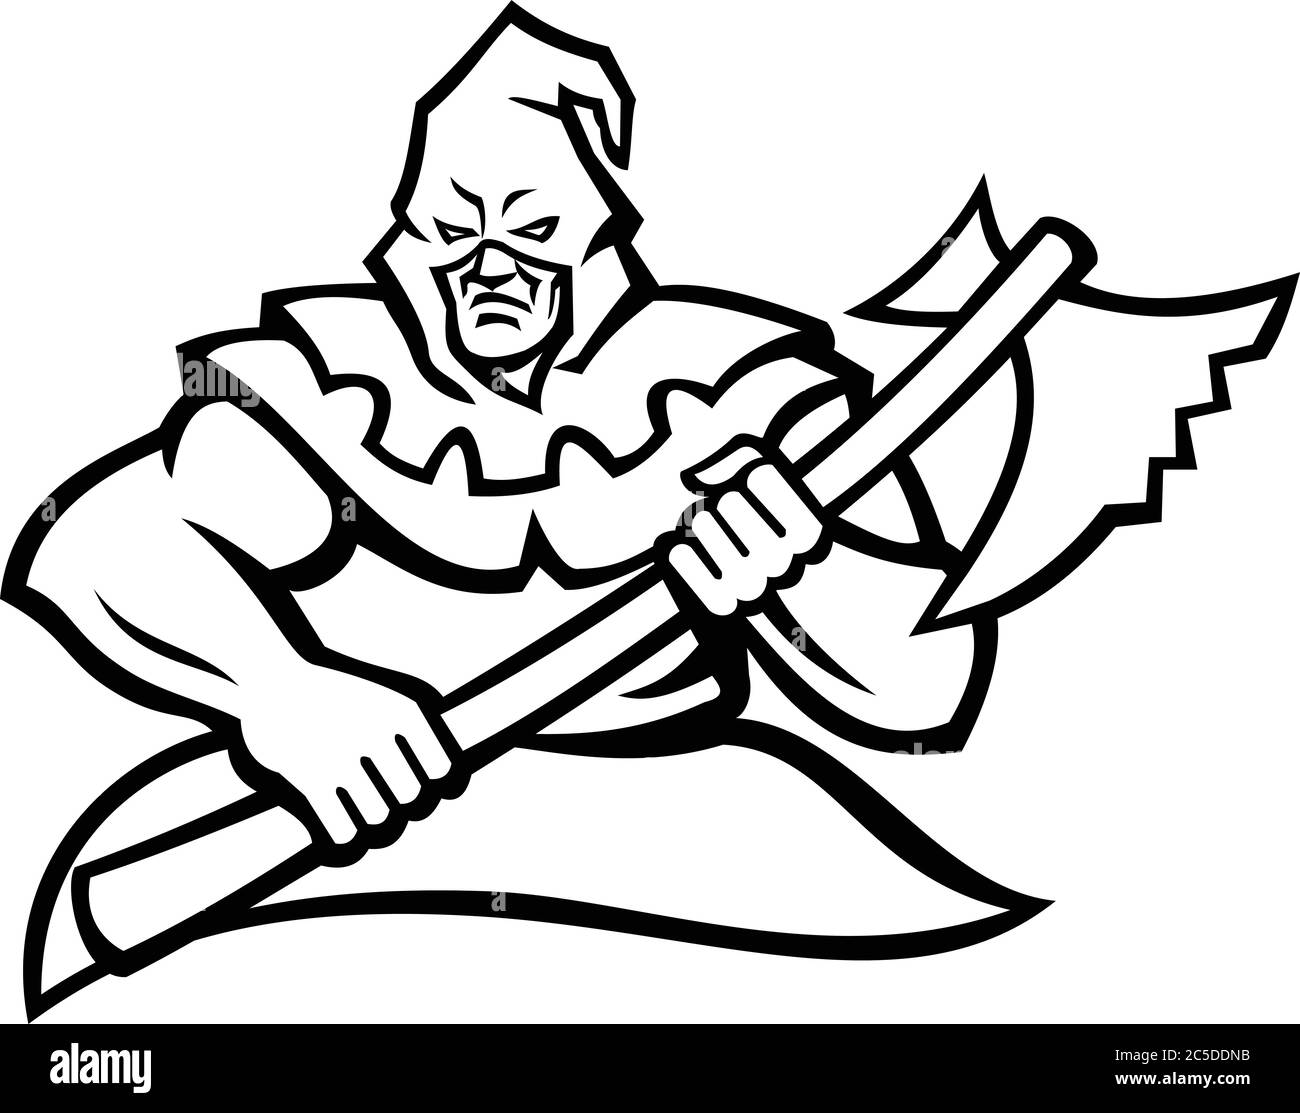 Black and white mascot illustration of a hooded medieval or absolutist executioner or headsman carrying an axe viewed from front on isolated backgroun Stock Vector